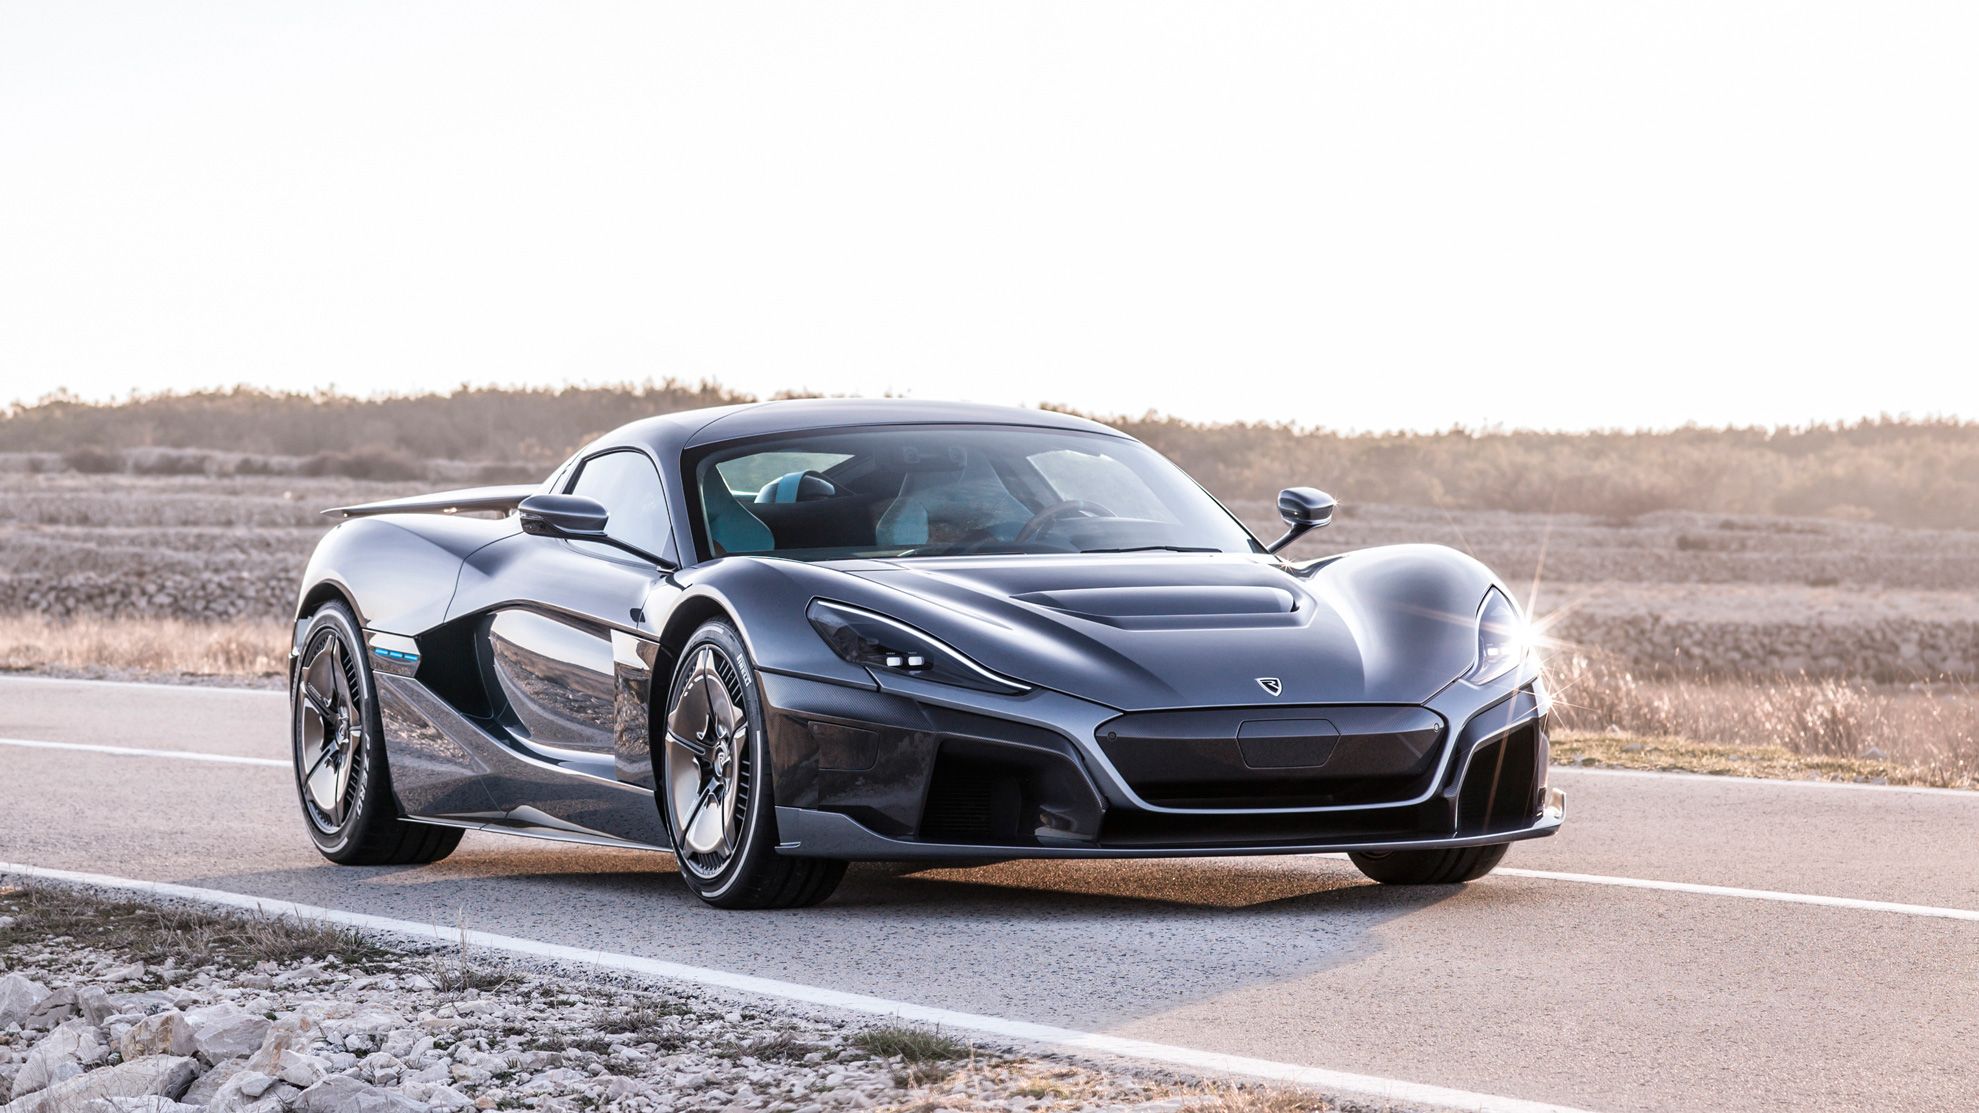 Rimac C-Two on roadside with desert background